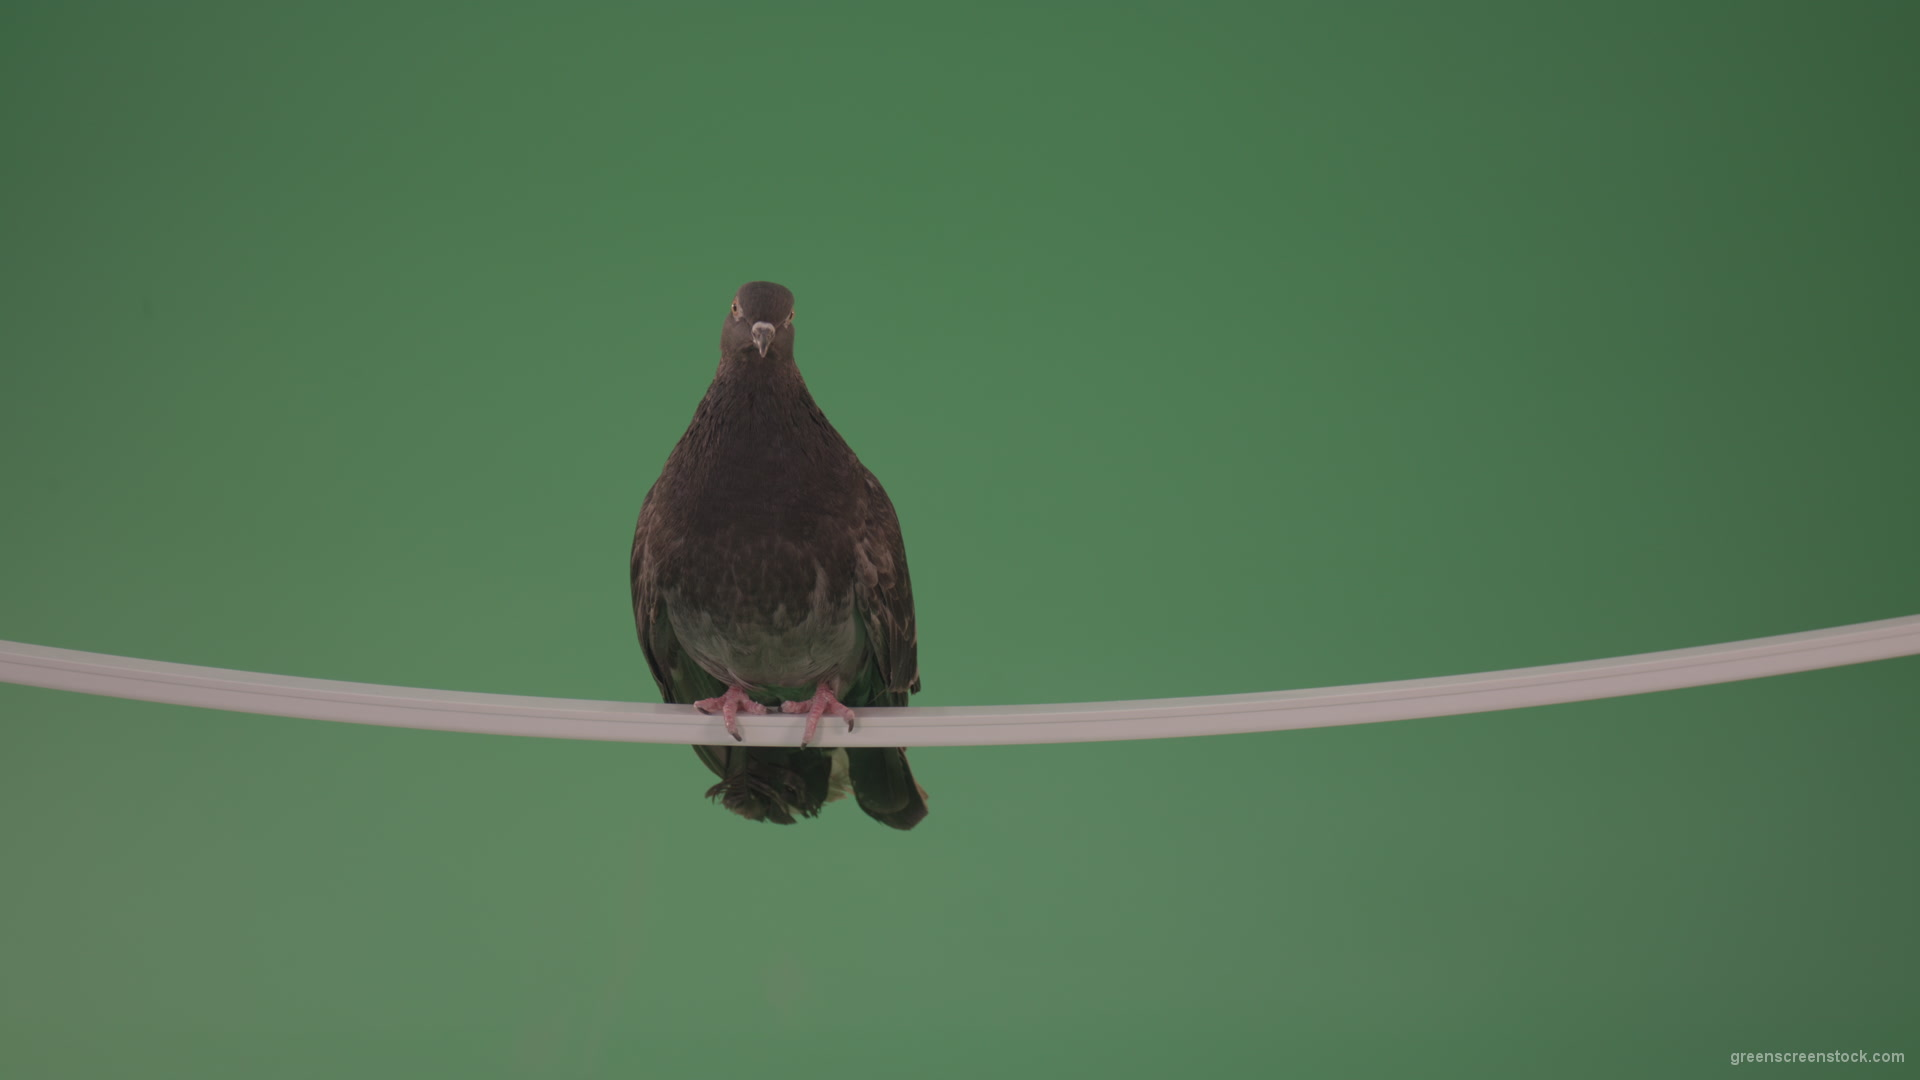 Sitting-bird-doves-on-a-pipe-in-a-big-city-isolated-on-chromakey-background_008 Green Screen Stock